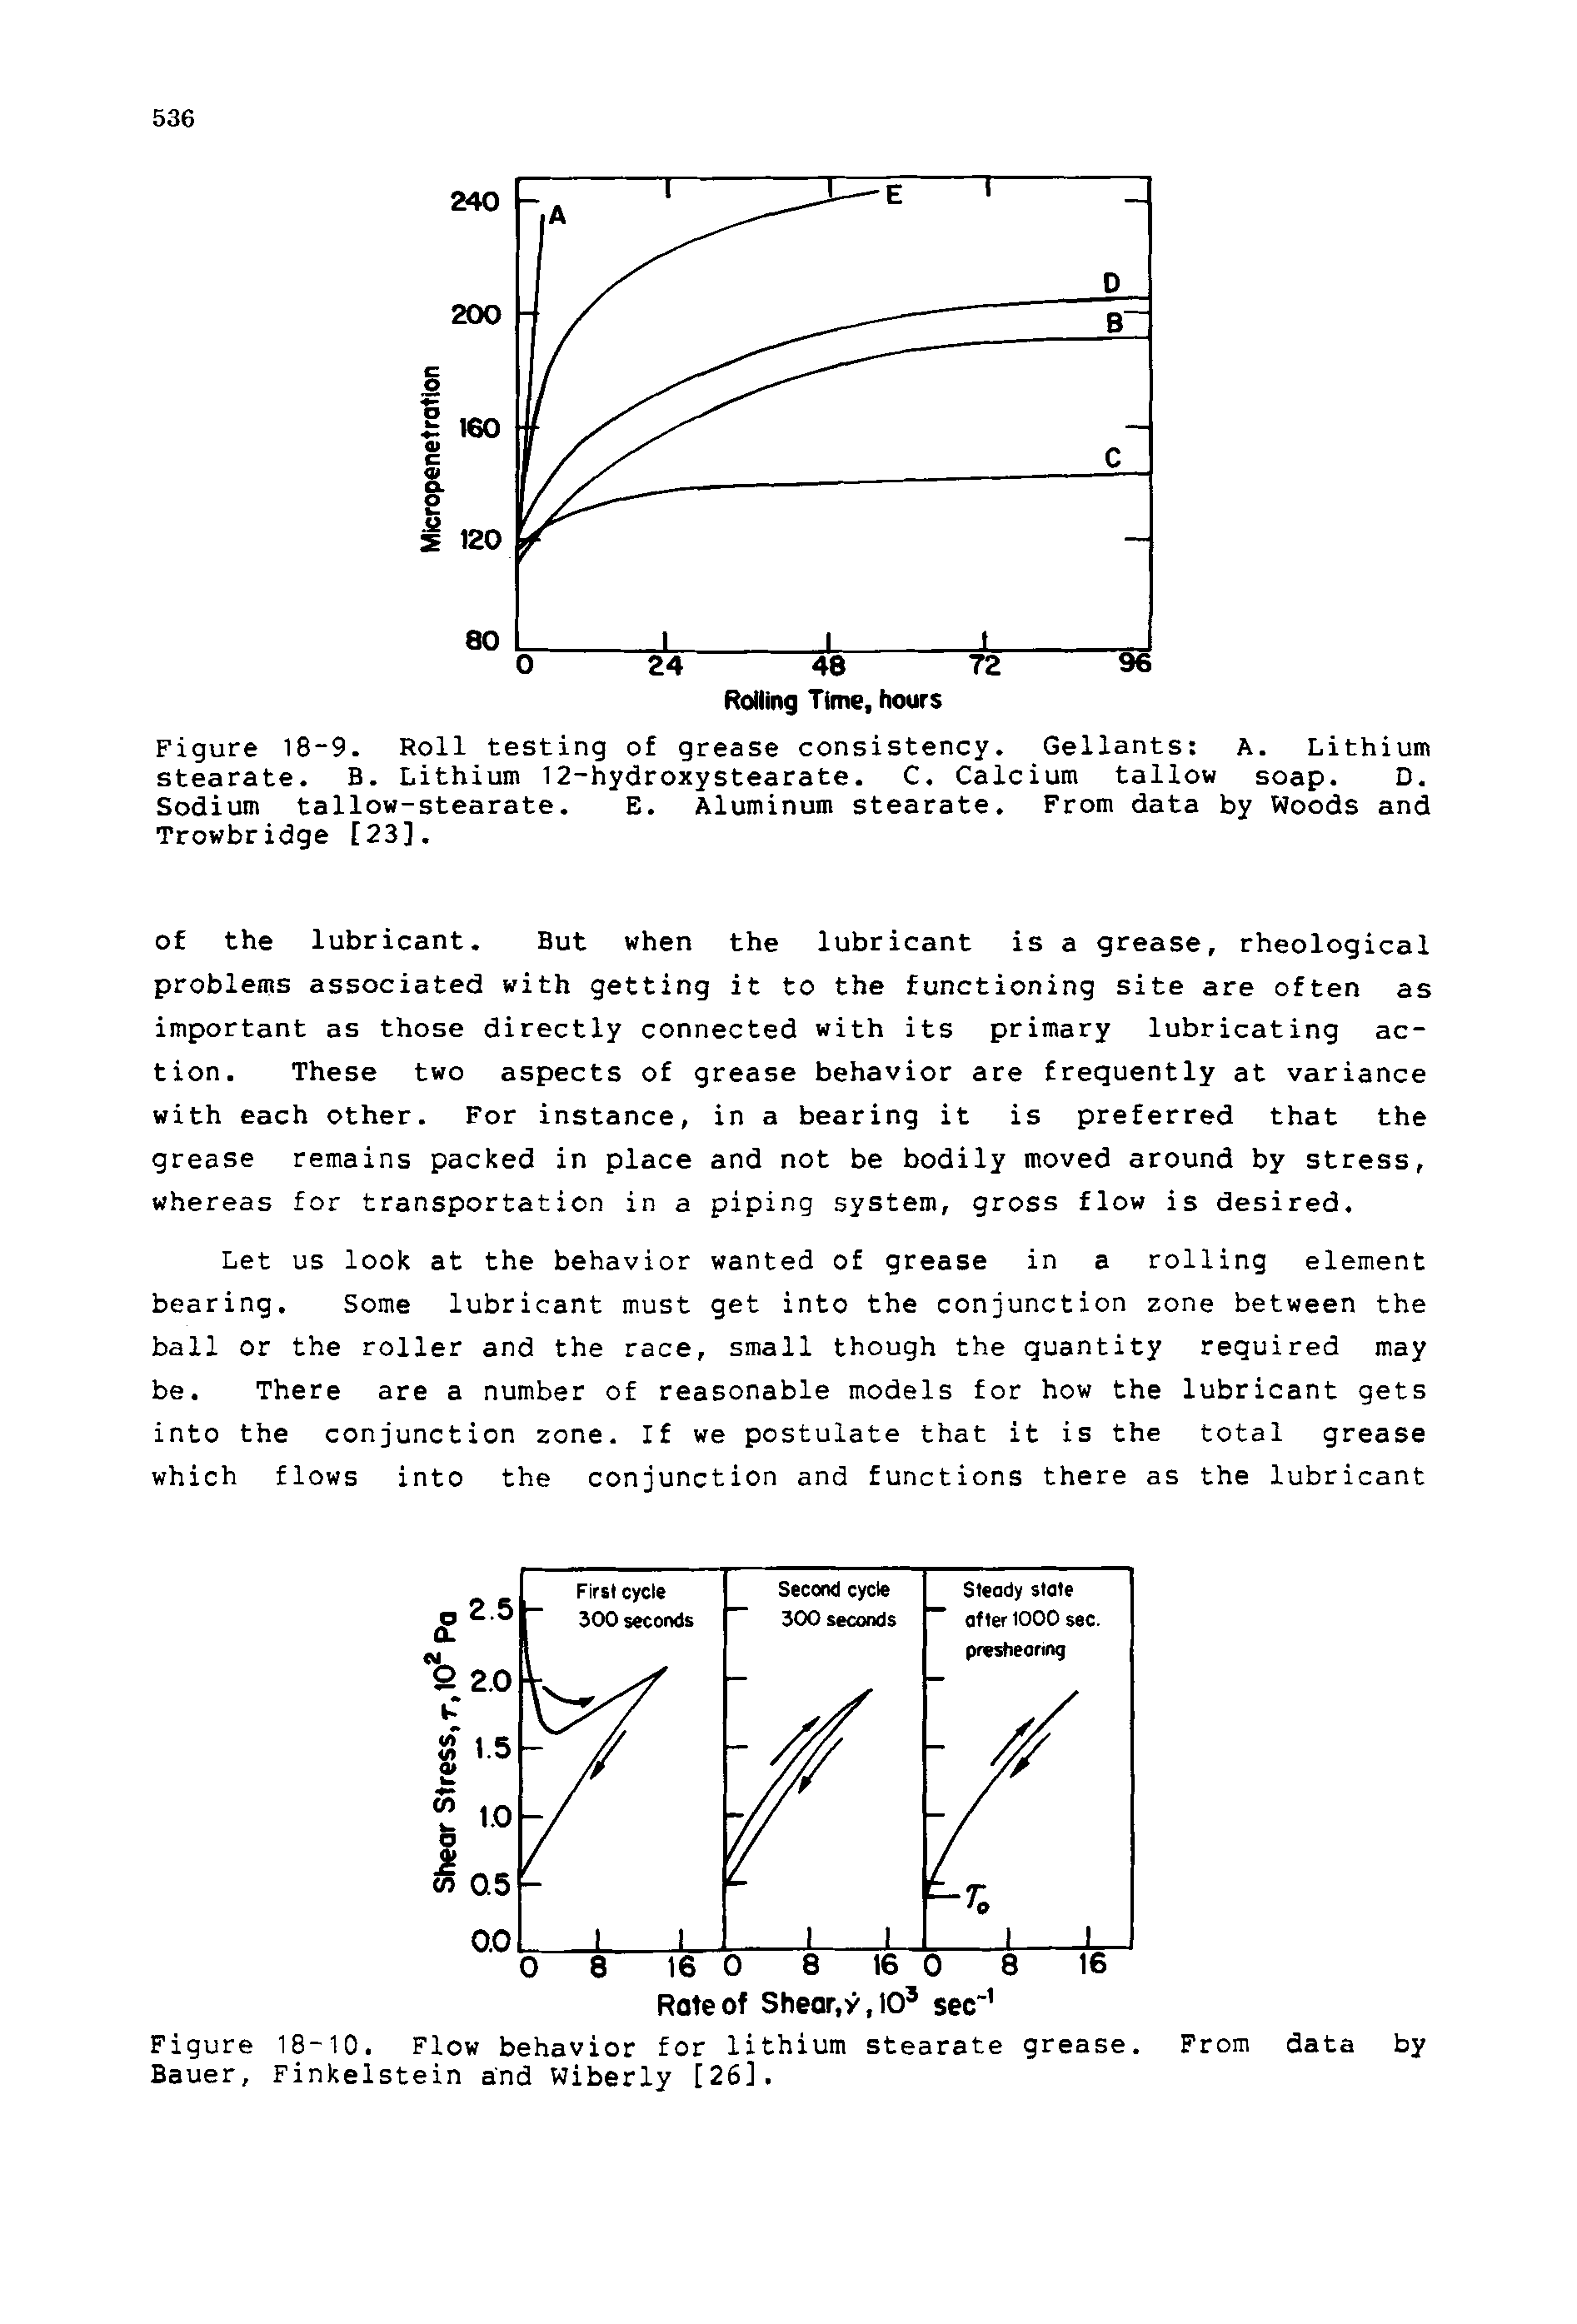 Figure 18-10. Flow behavior for lithium stearate grease. From data by Bauer, Finkelstein and Wiberly [26].